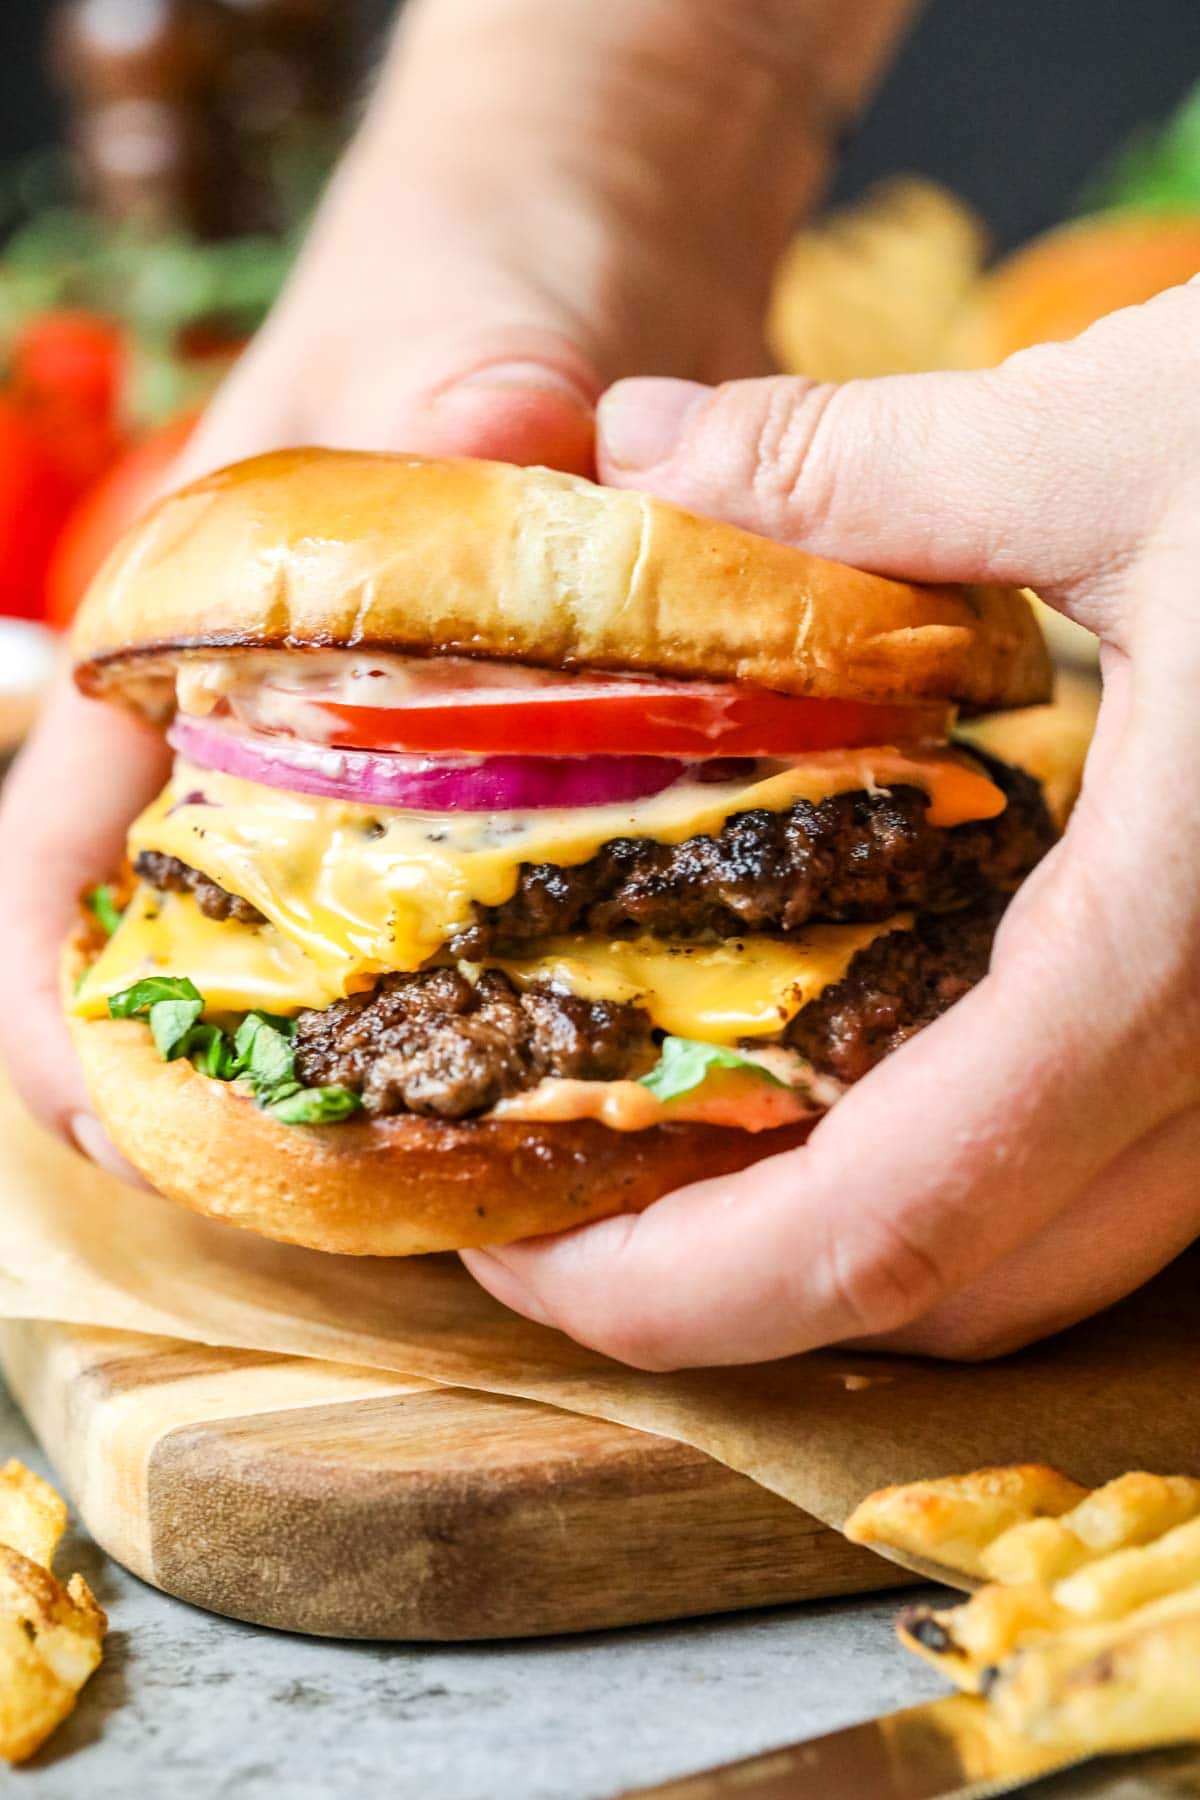 Hands holding a smash burger topped with American cheese, onion, tomato, and lettuce.